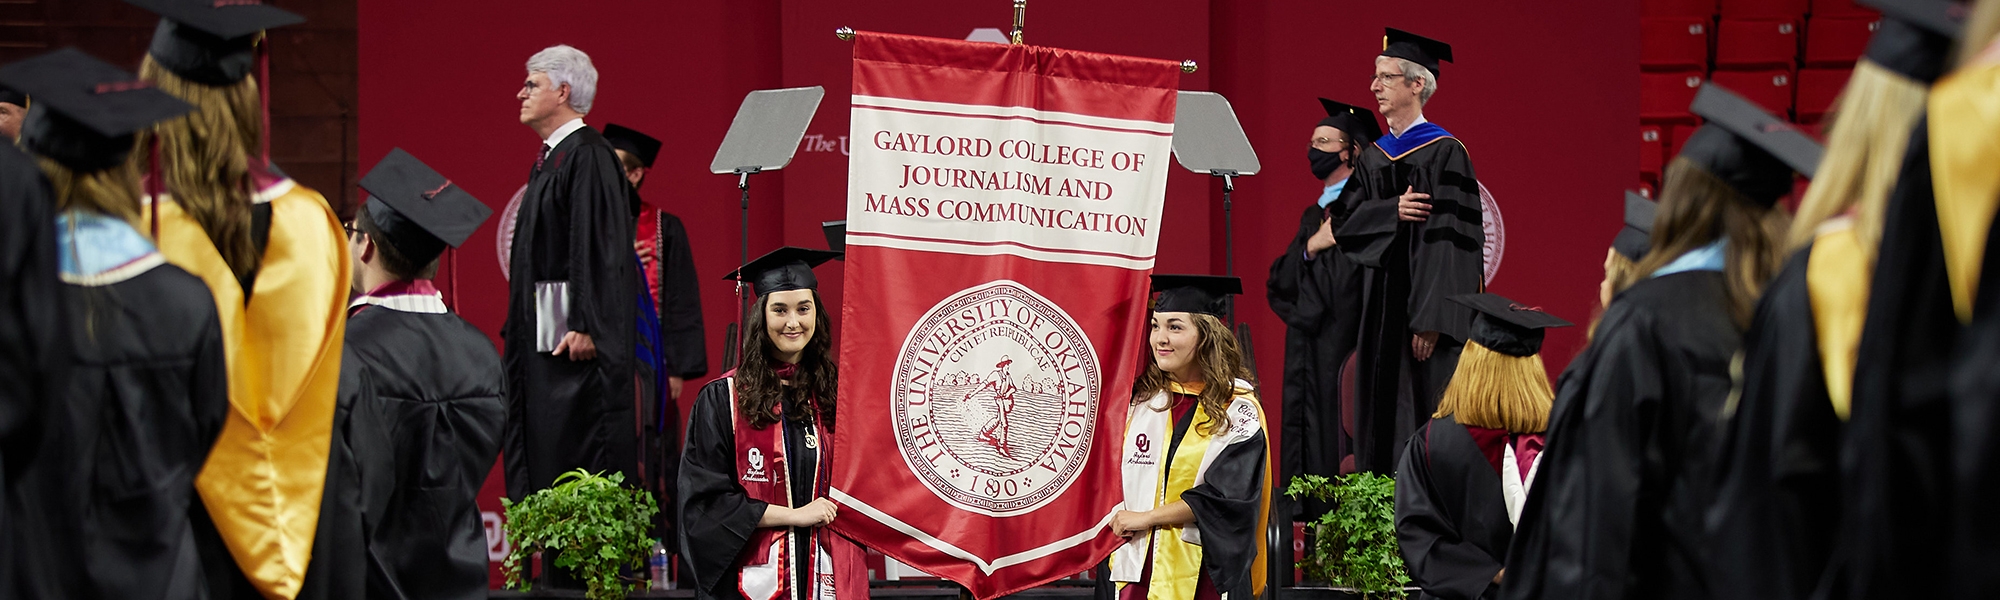 Banner carriers at convocation ceremony